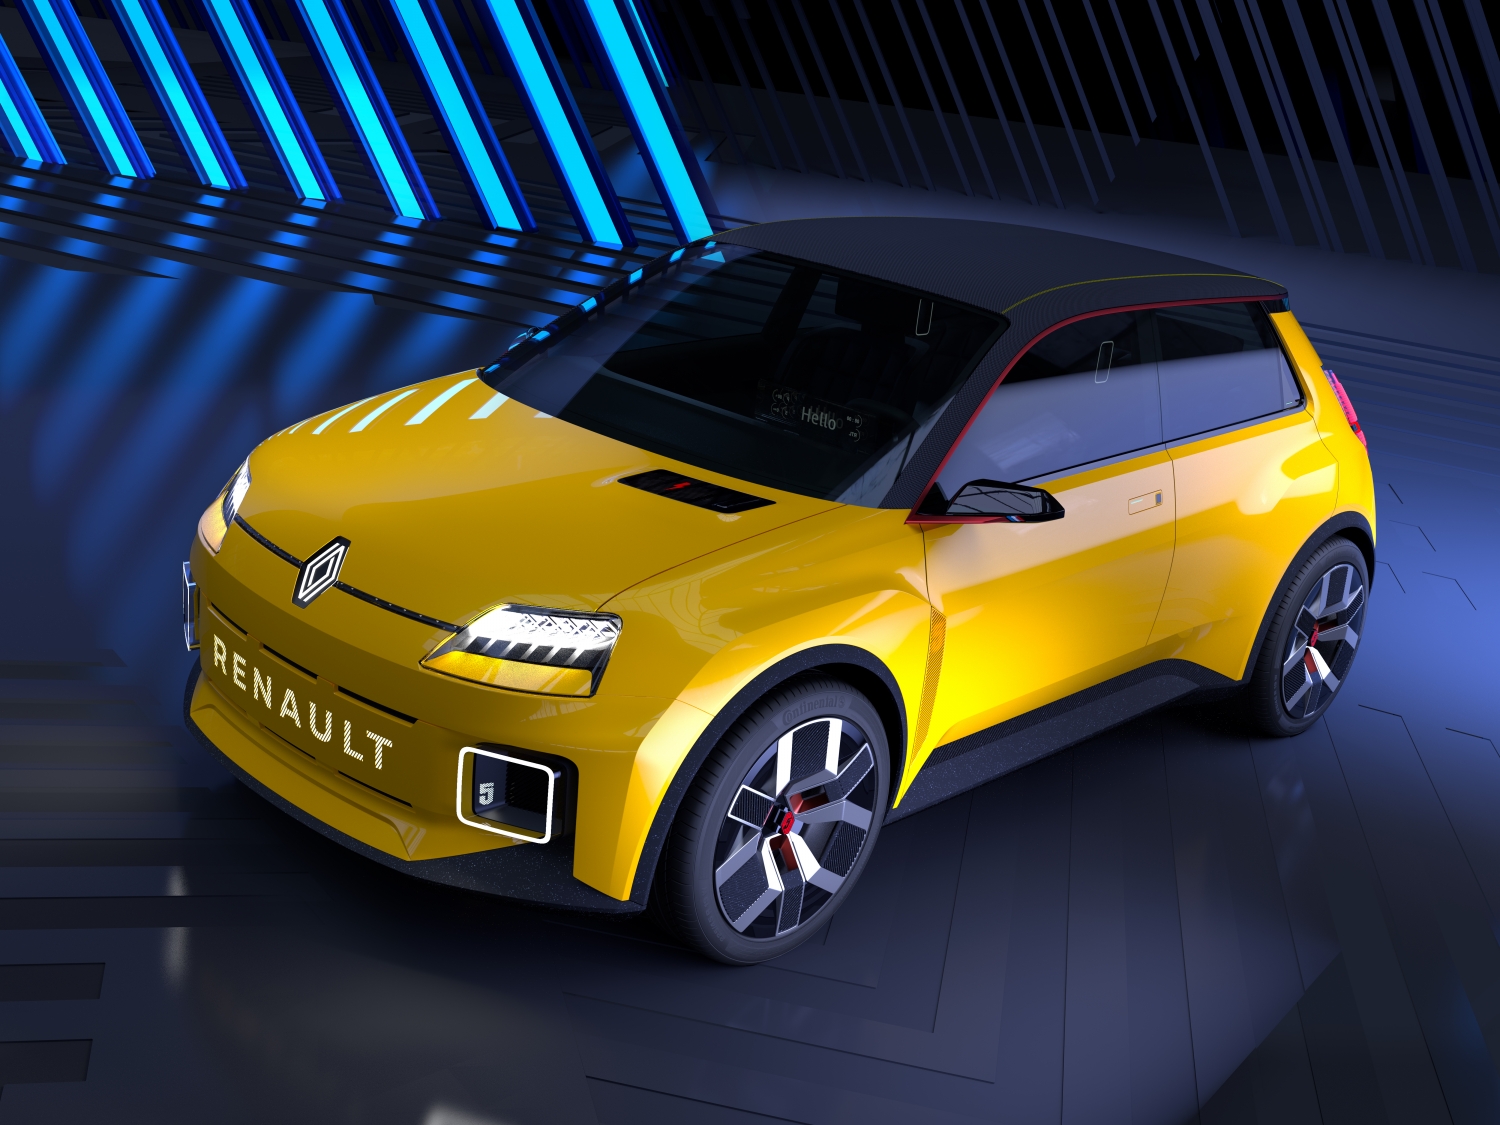 Renault future model plans for the 2020s - Just Auto